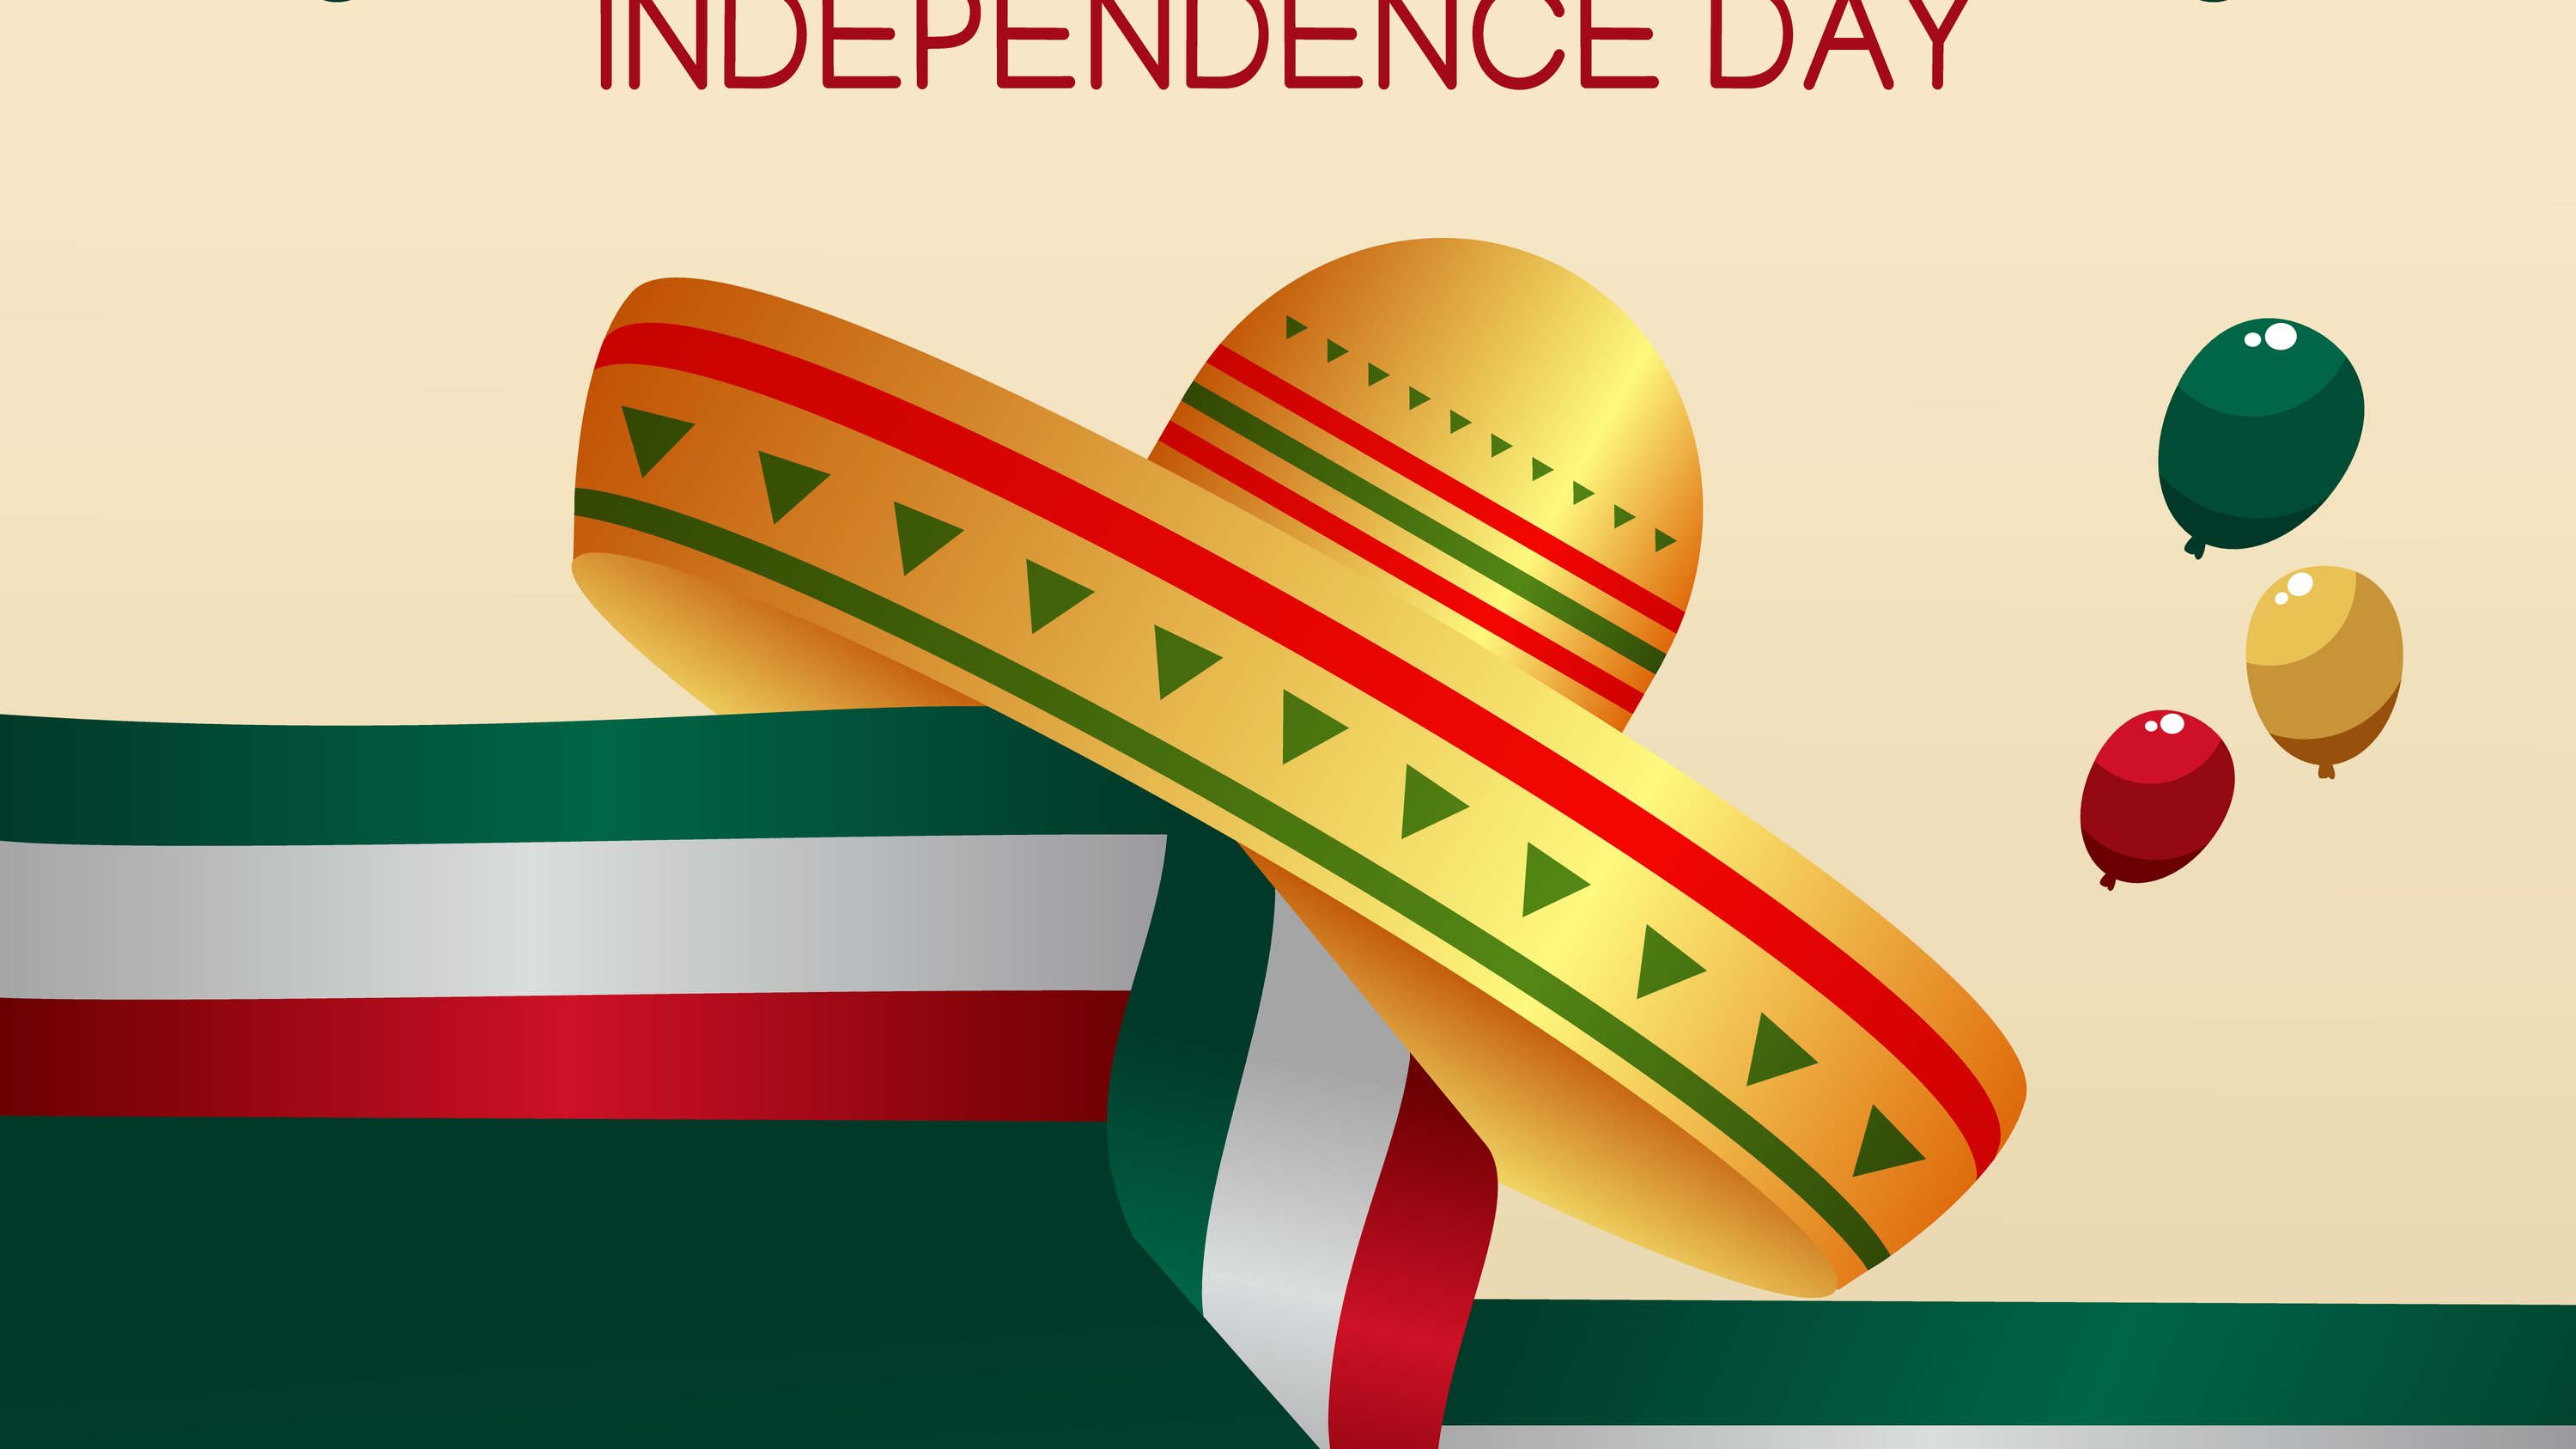 Mexican Independence Day: What, Where, Why, and When